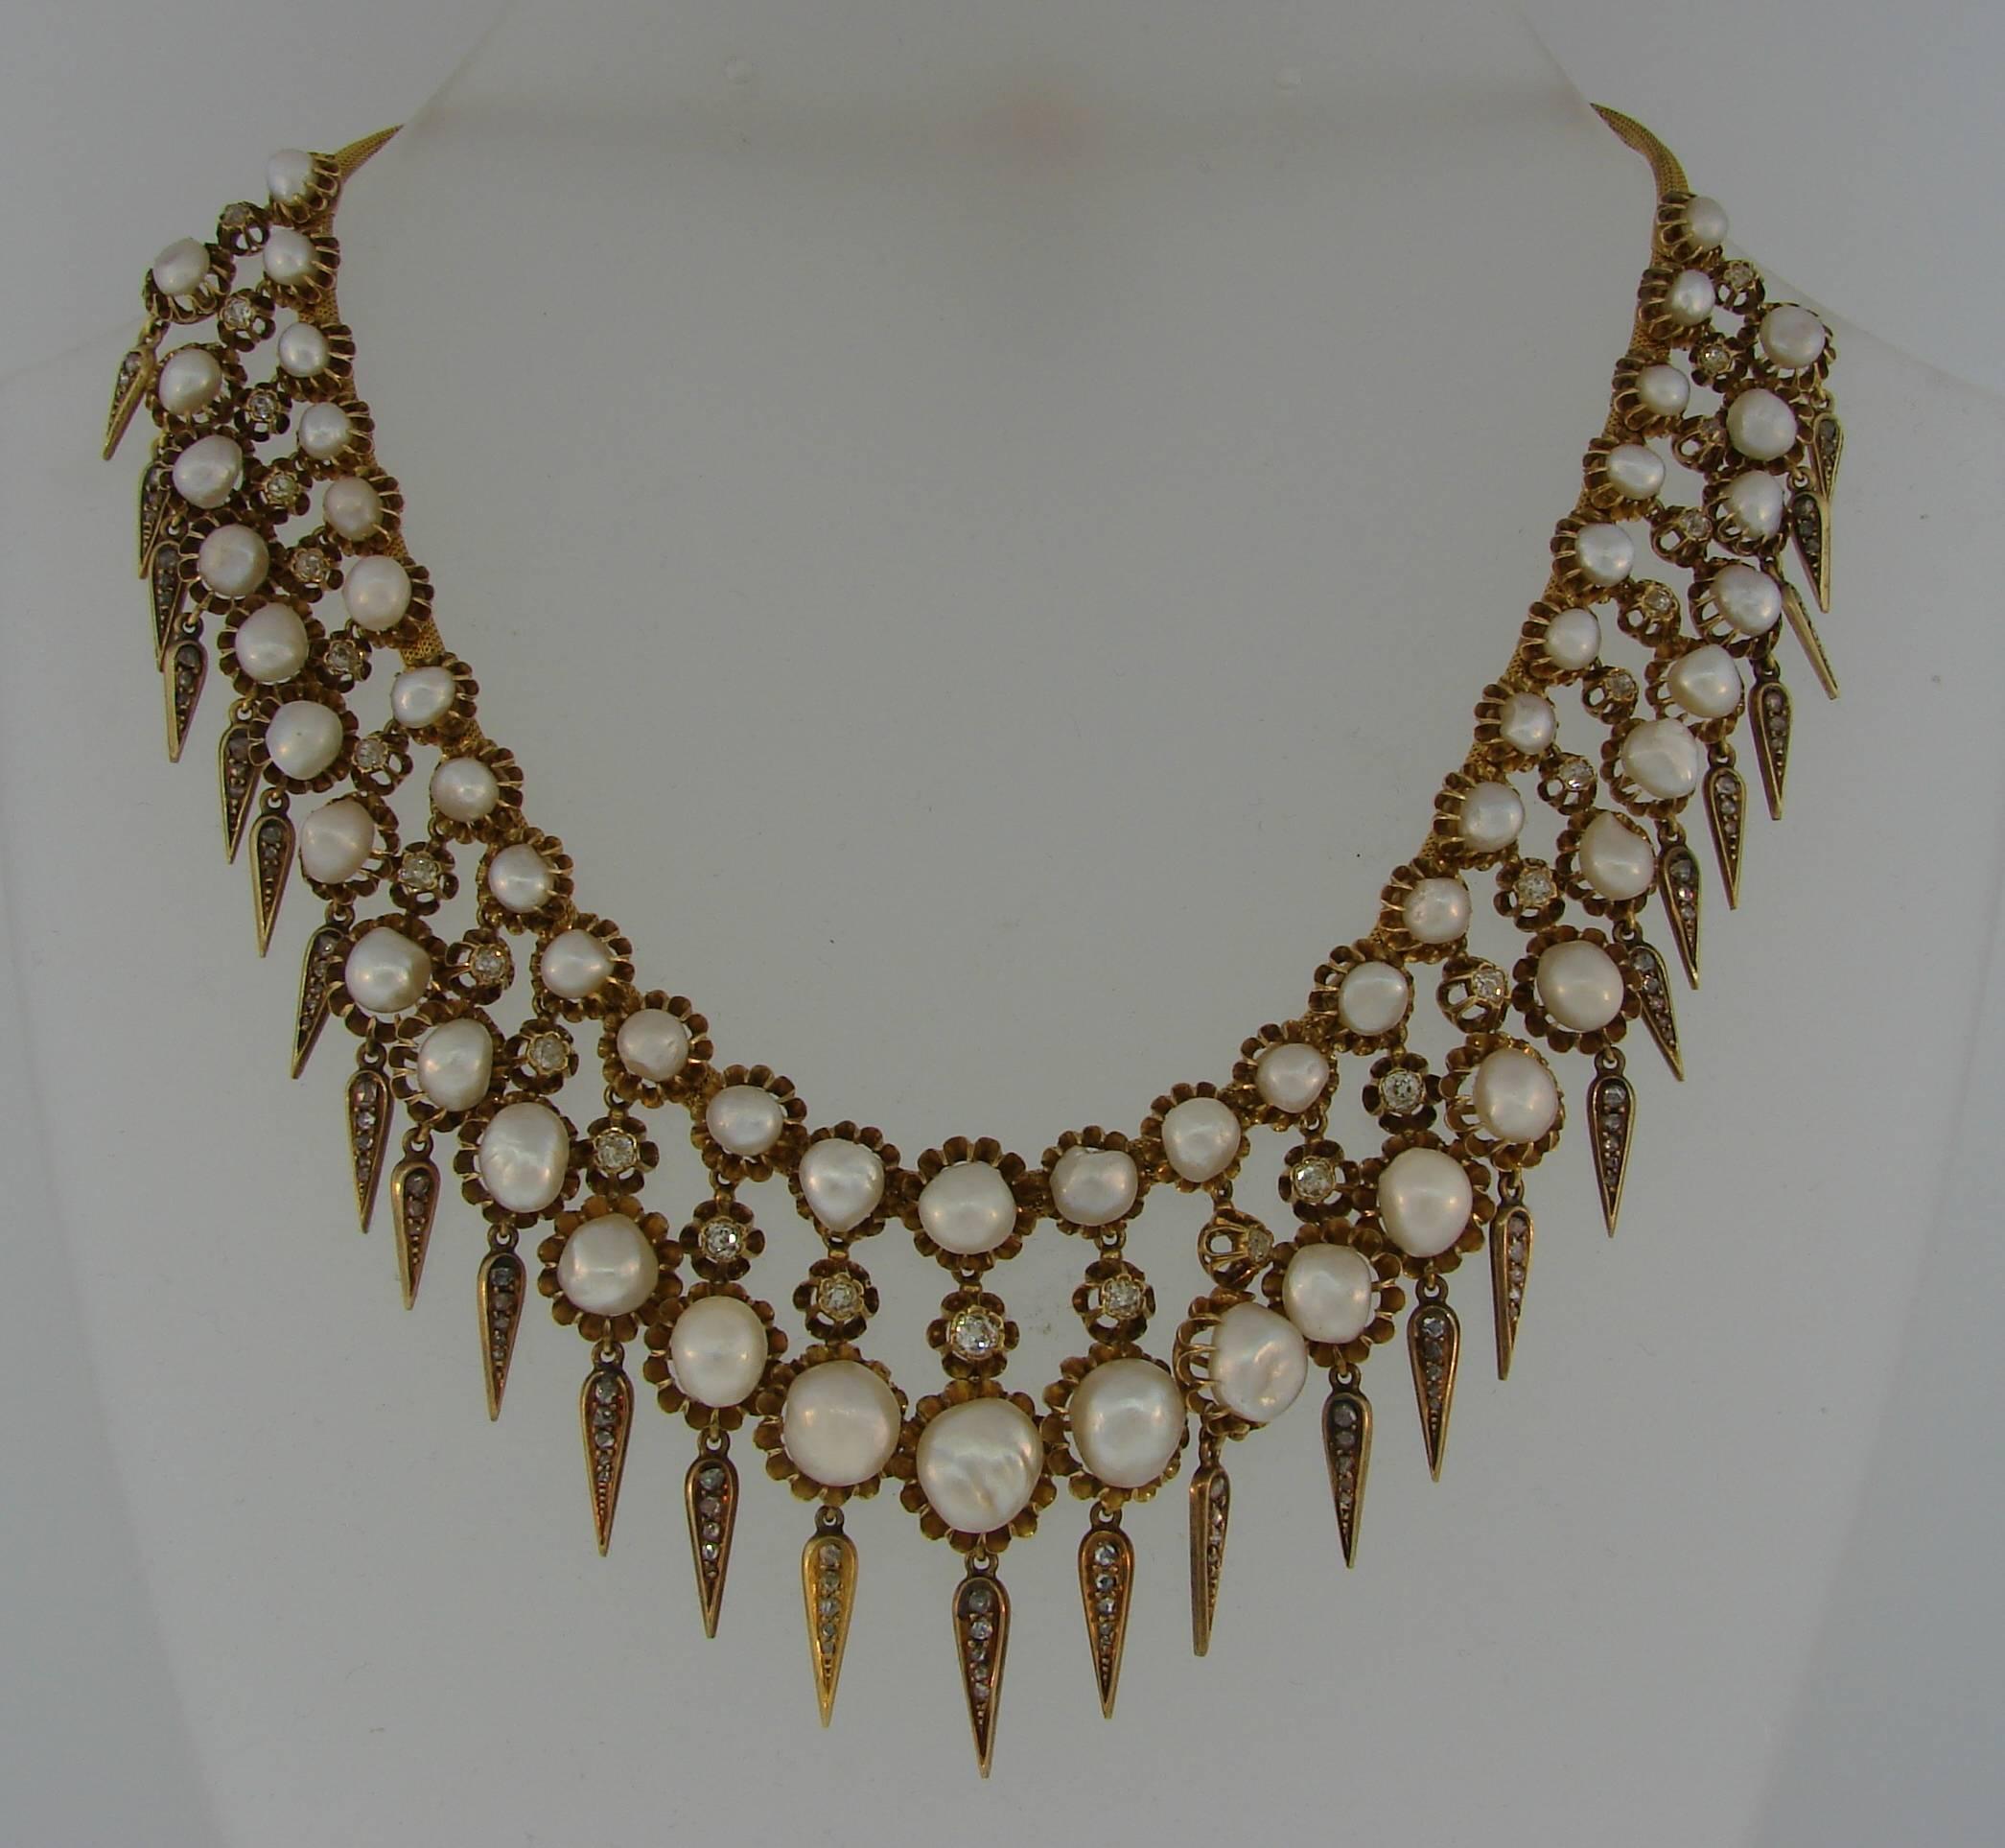 Stunning Victorian necklace created on the turn of 20th century. Elegant and chic, it is a great addition to your jewelry collection.
The necklace features fifty six natural pearls set in 18 karat (tested) yellow gold and encrusted with Old